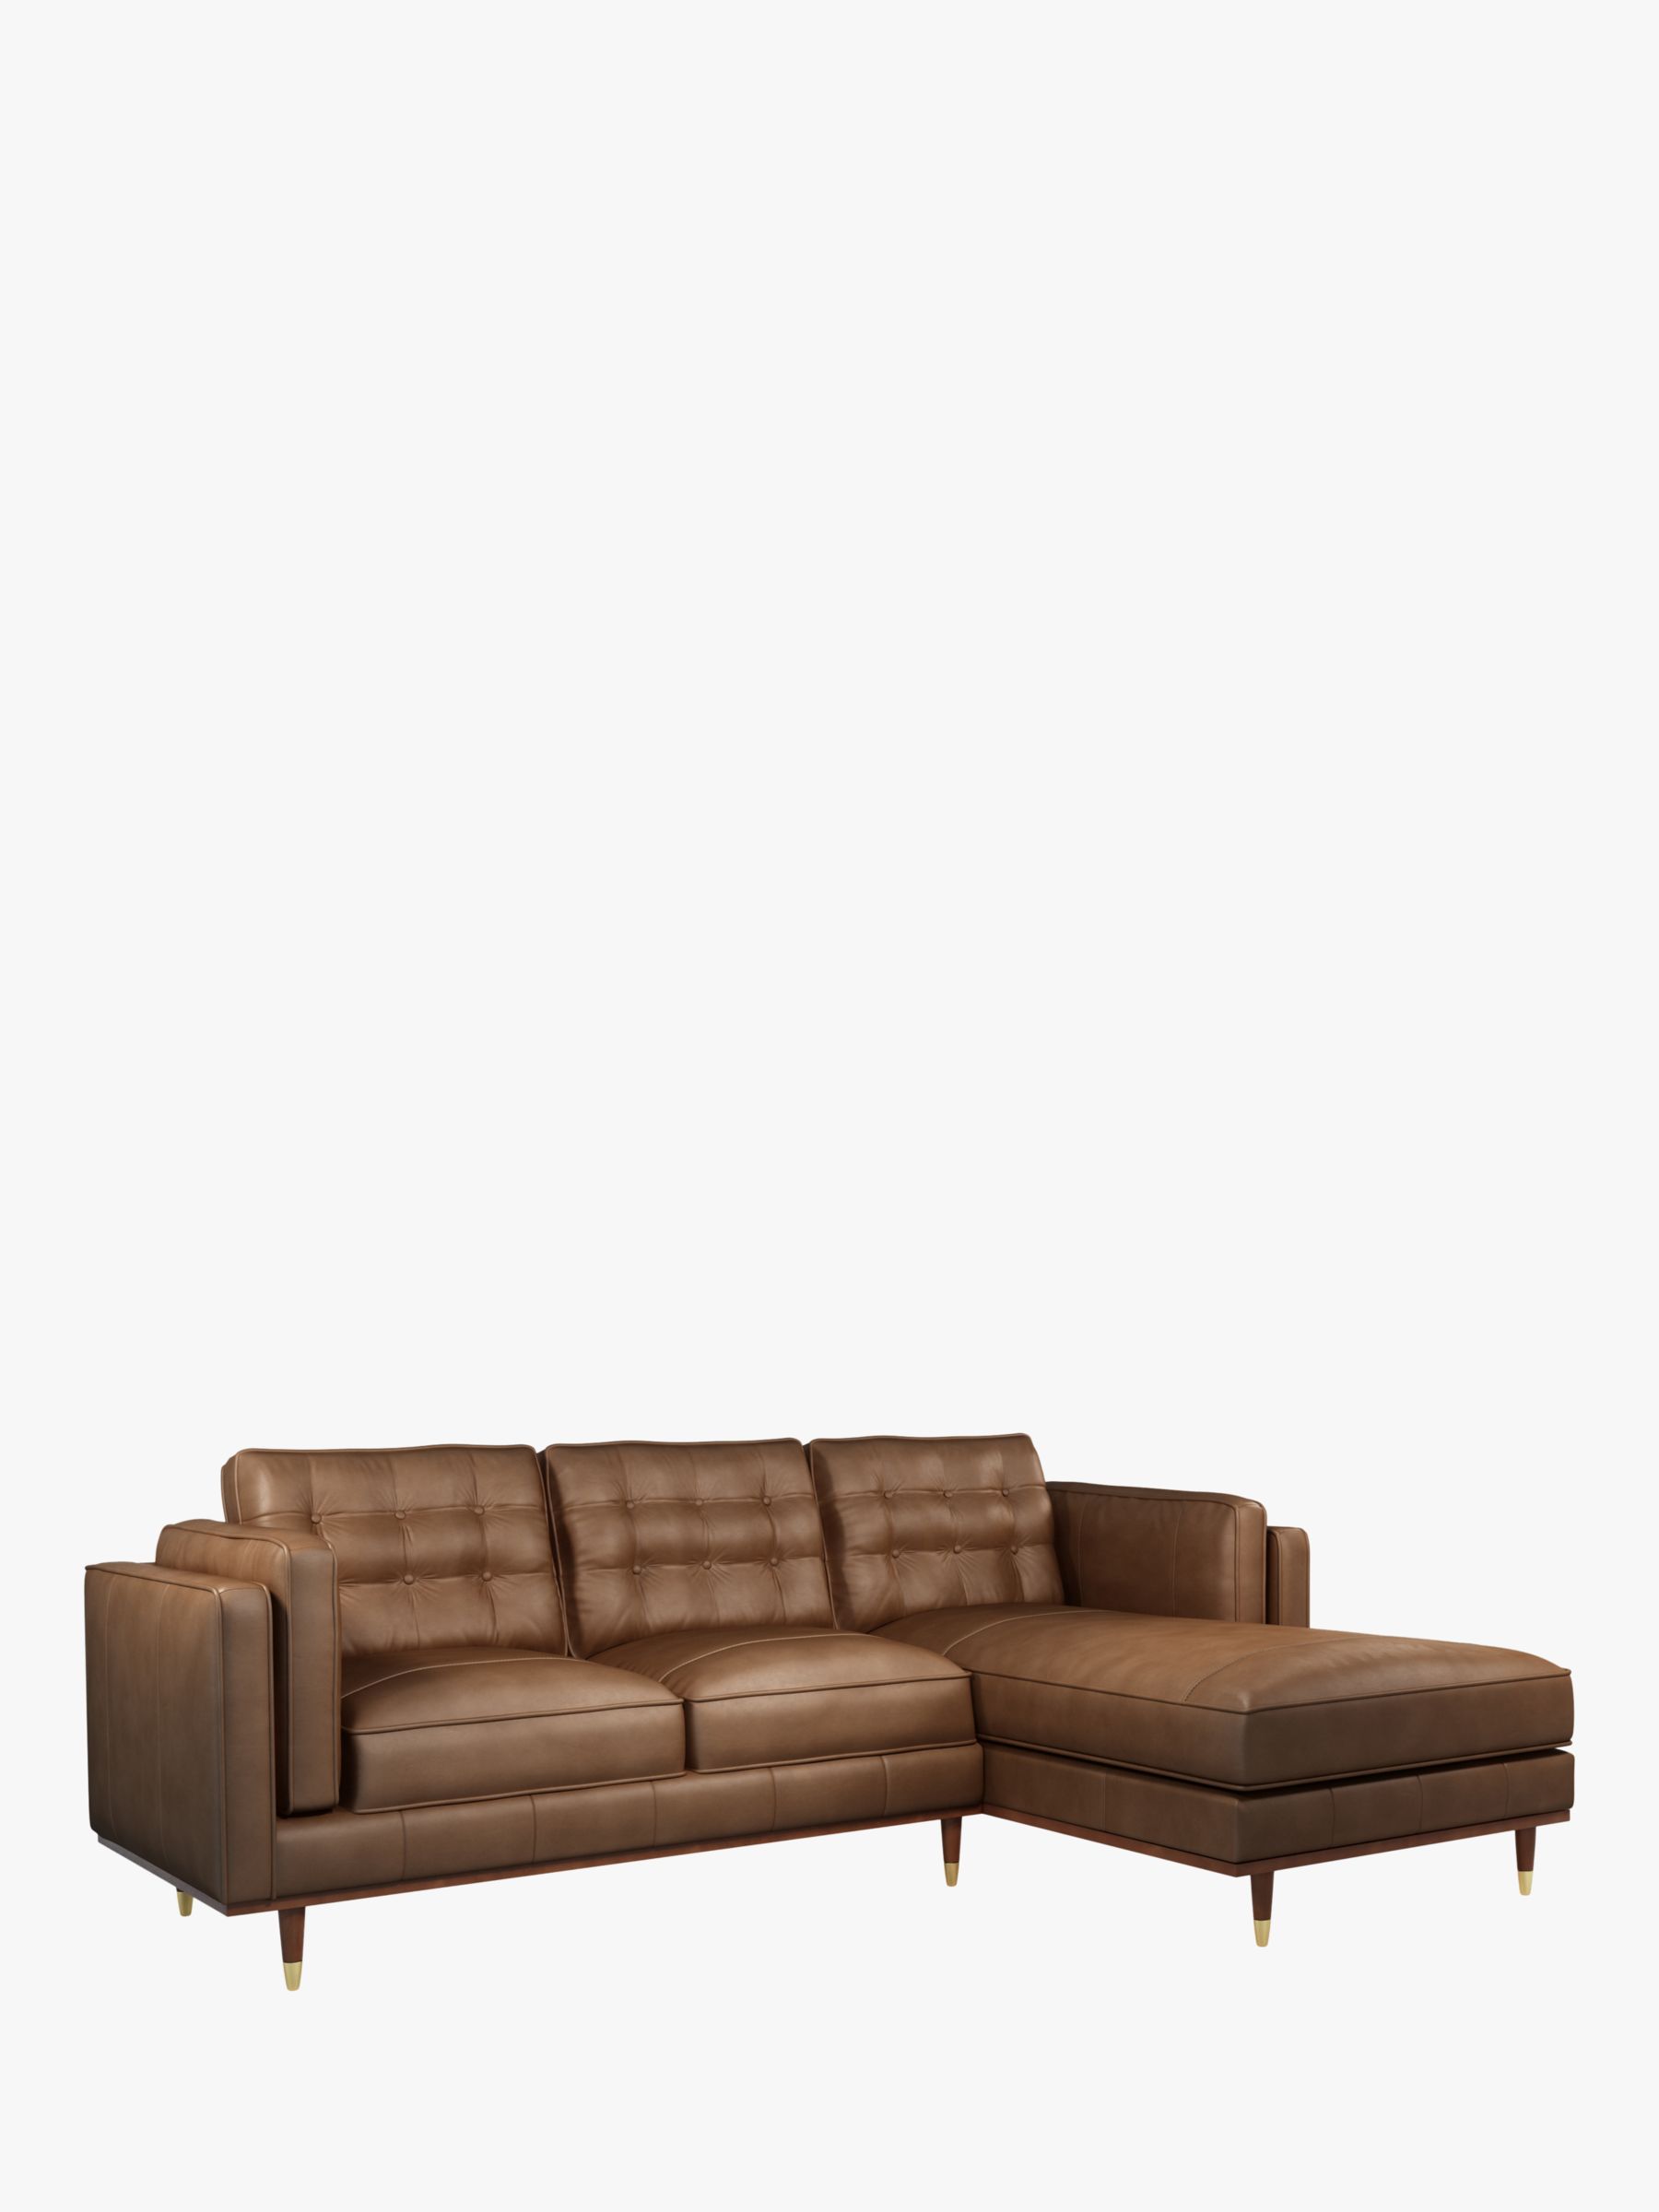 Photo of John lewis + swoon lyon rhf chaise end leather sofa